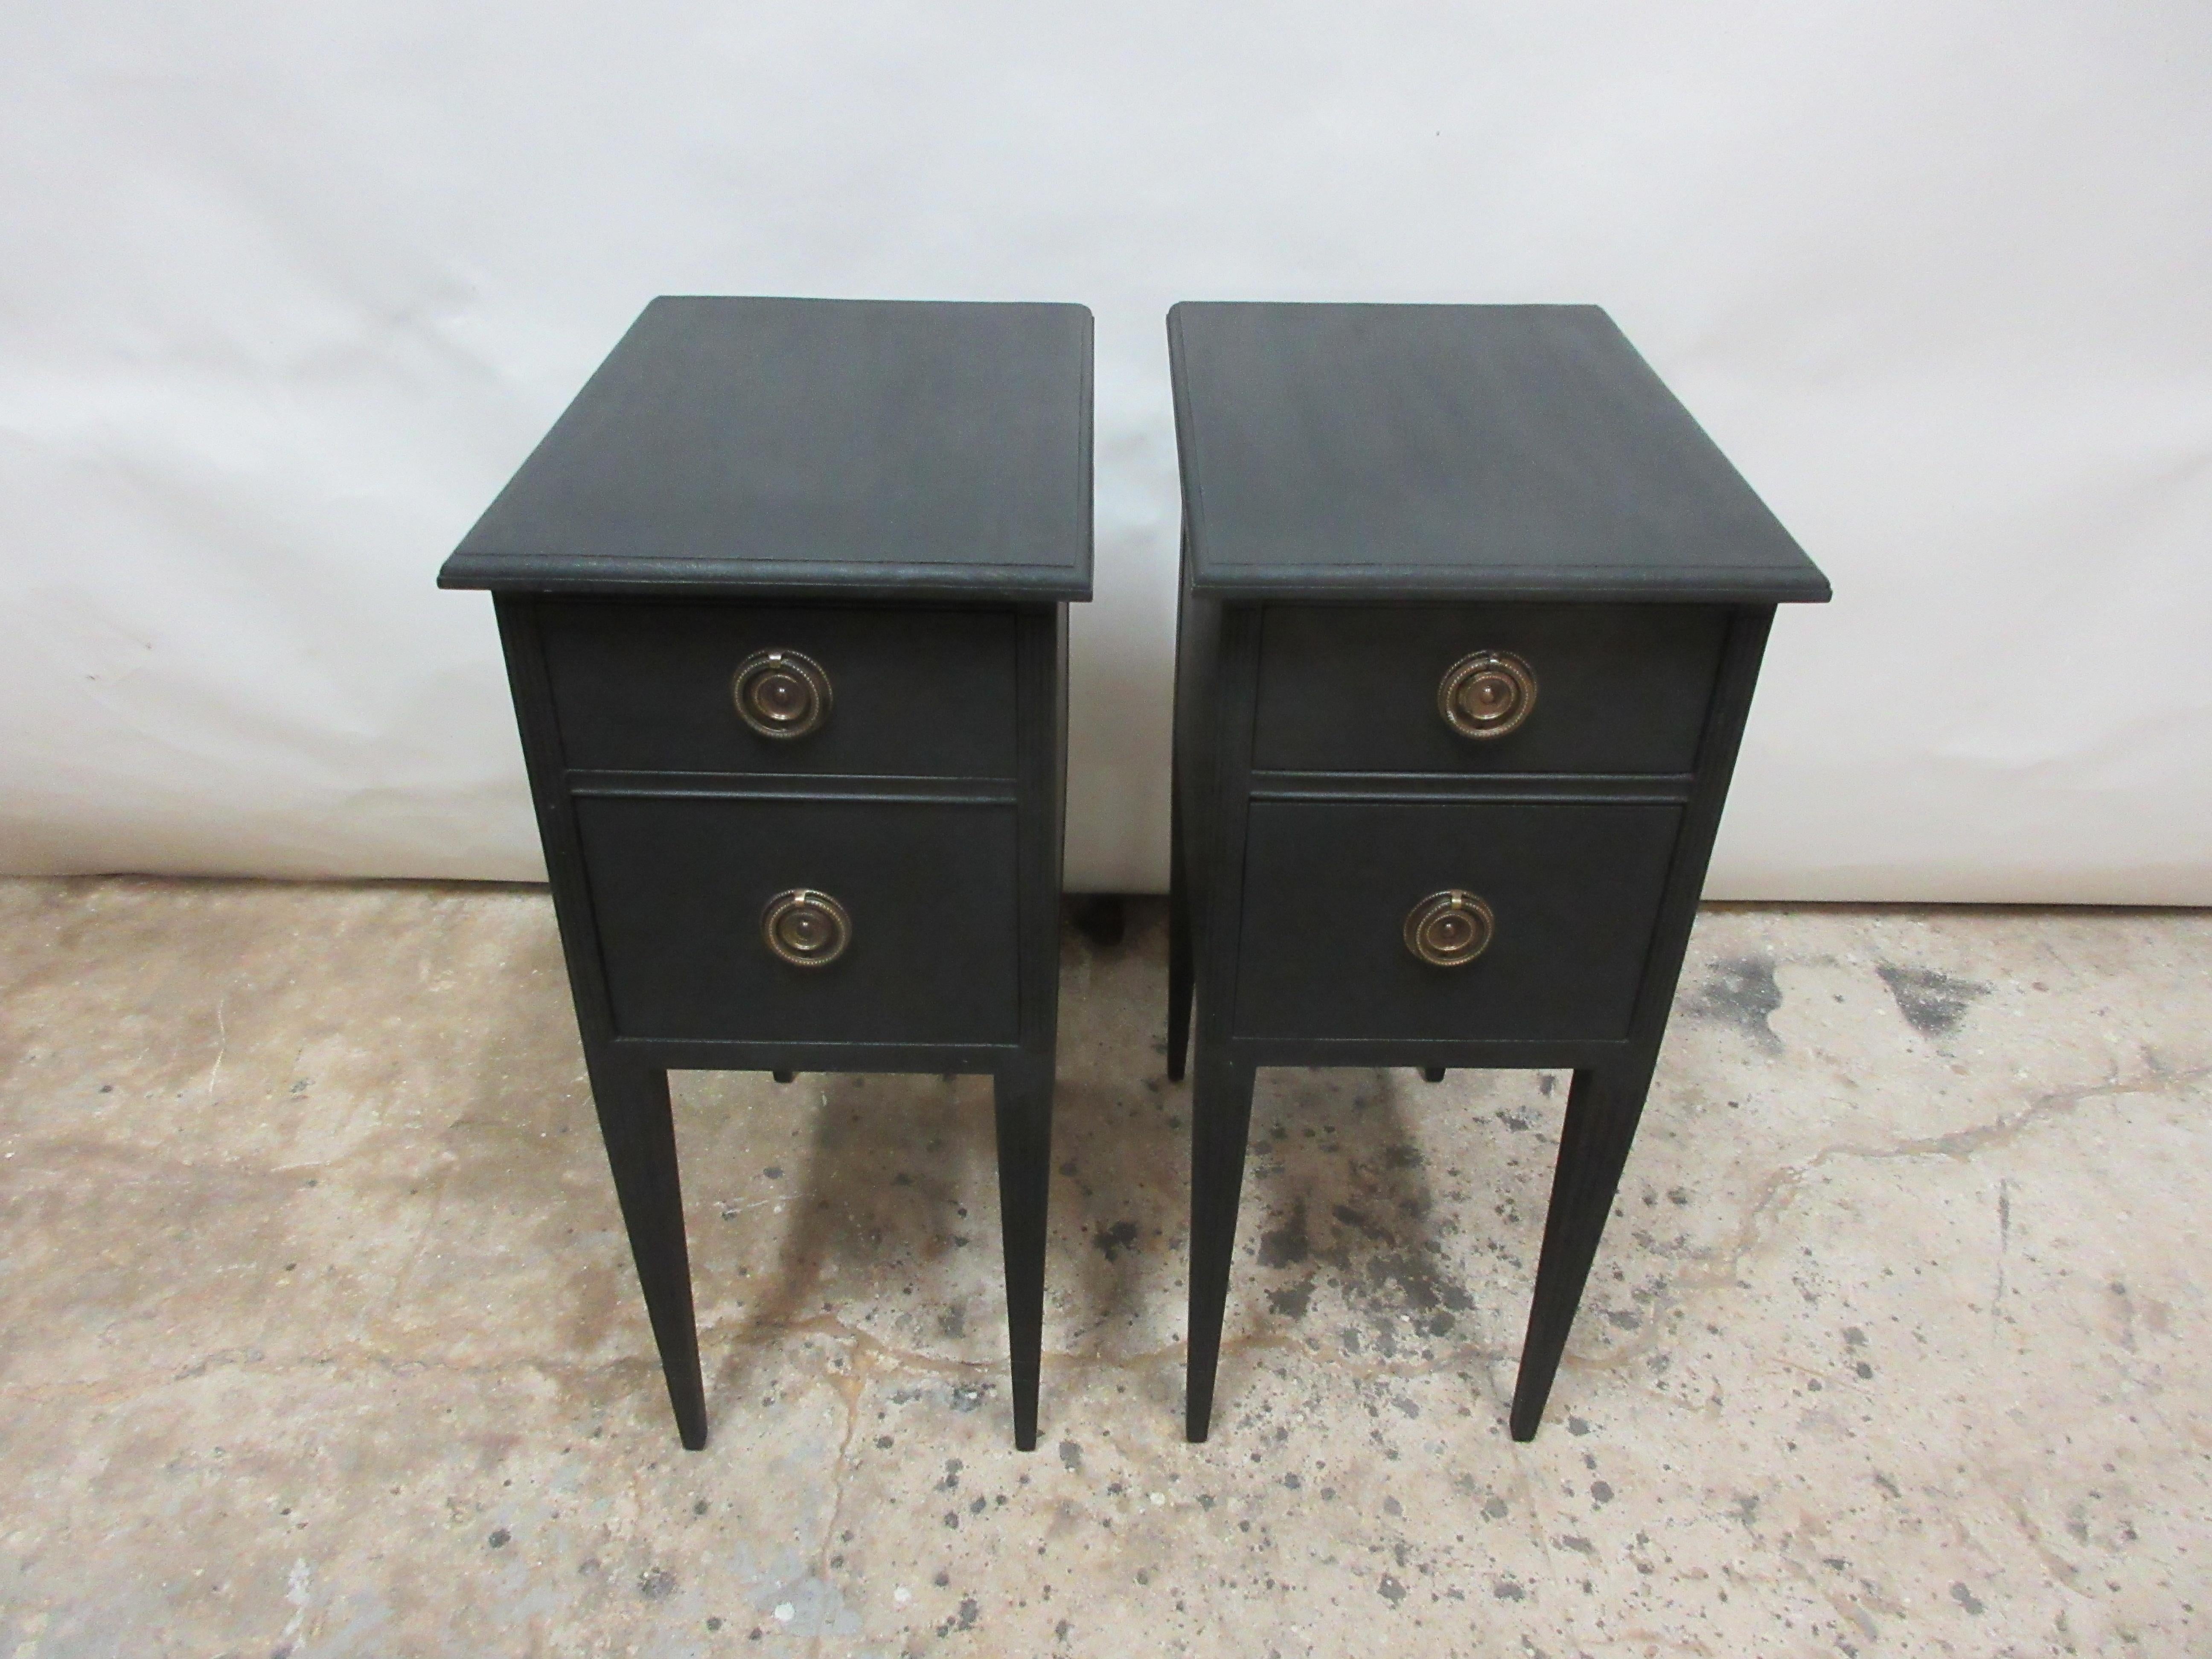 This is a set of 2 Gustavian style nightstands. They have been restored and repainted in milk paints 